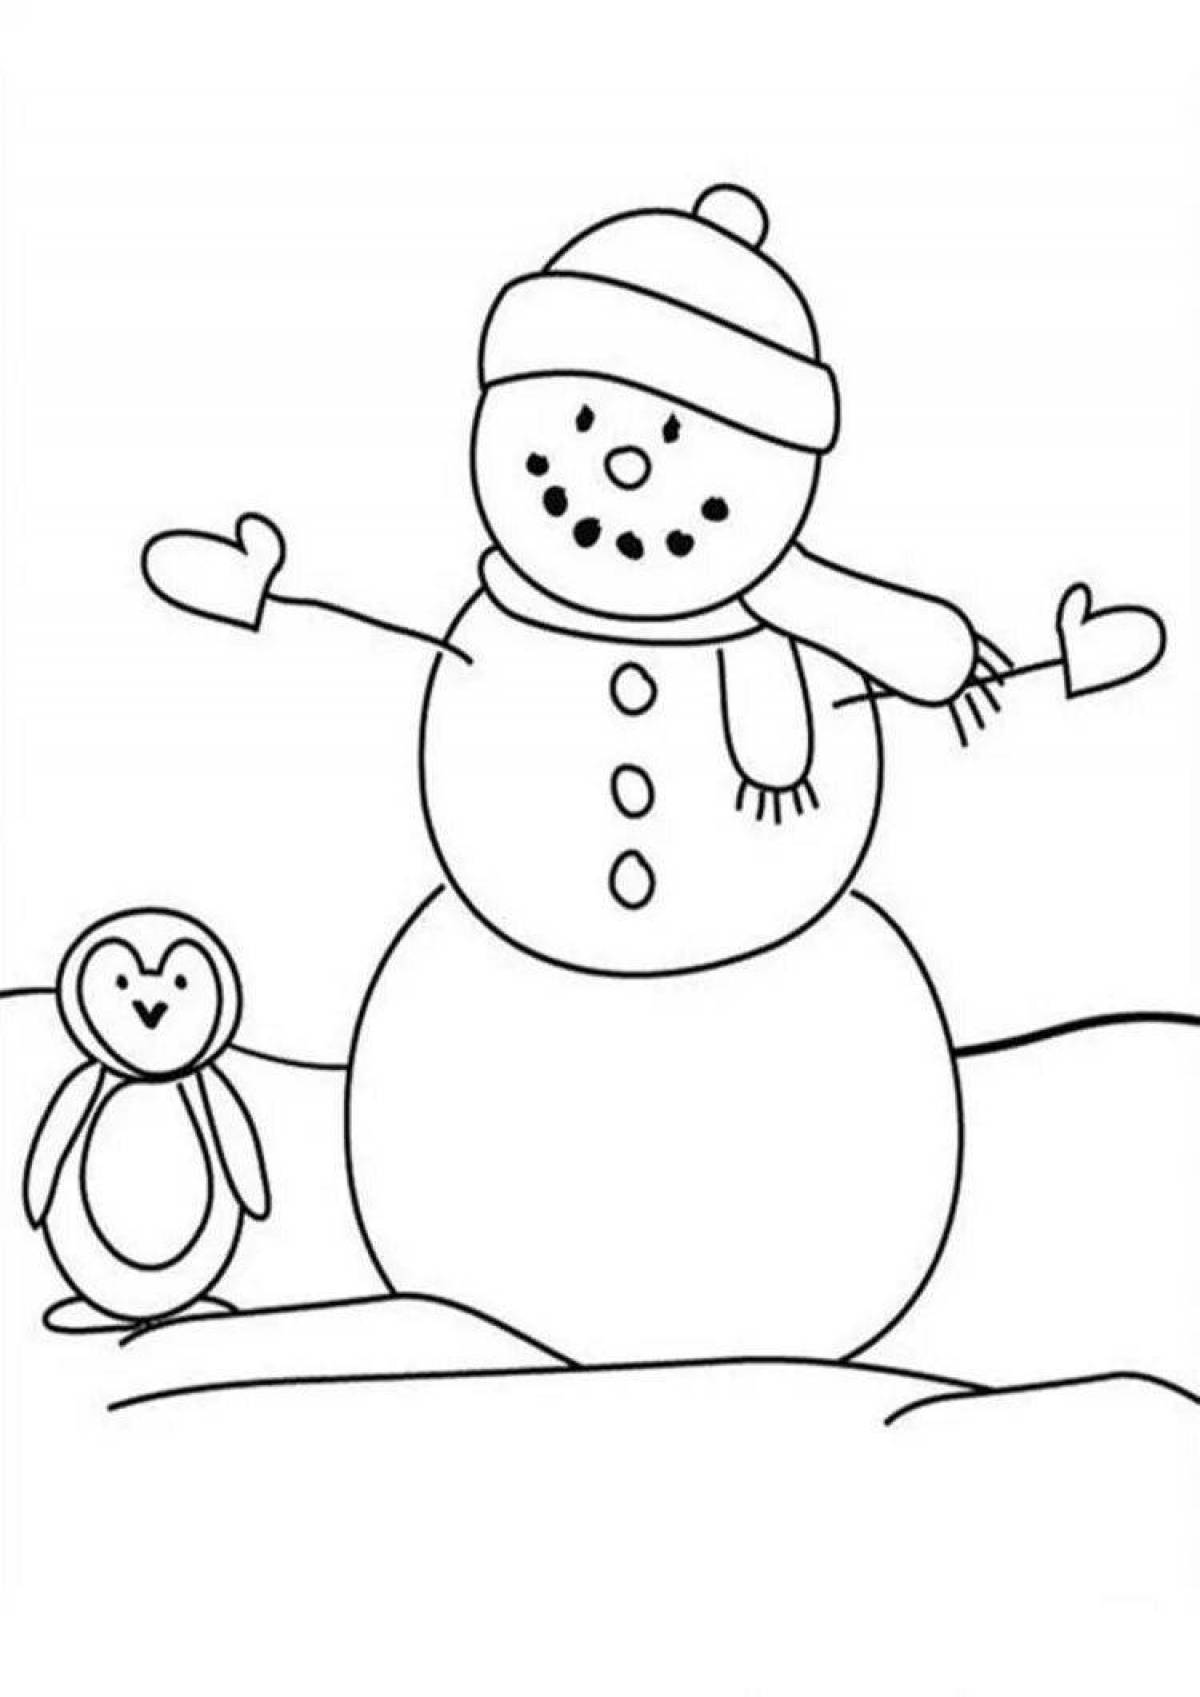 Glowing snowman coloring page